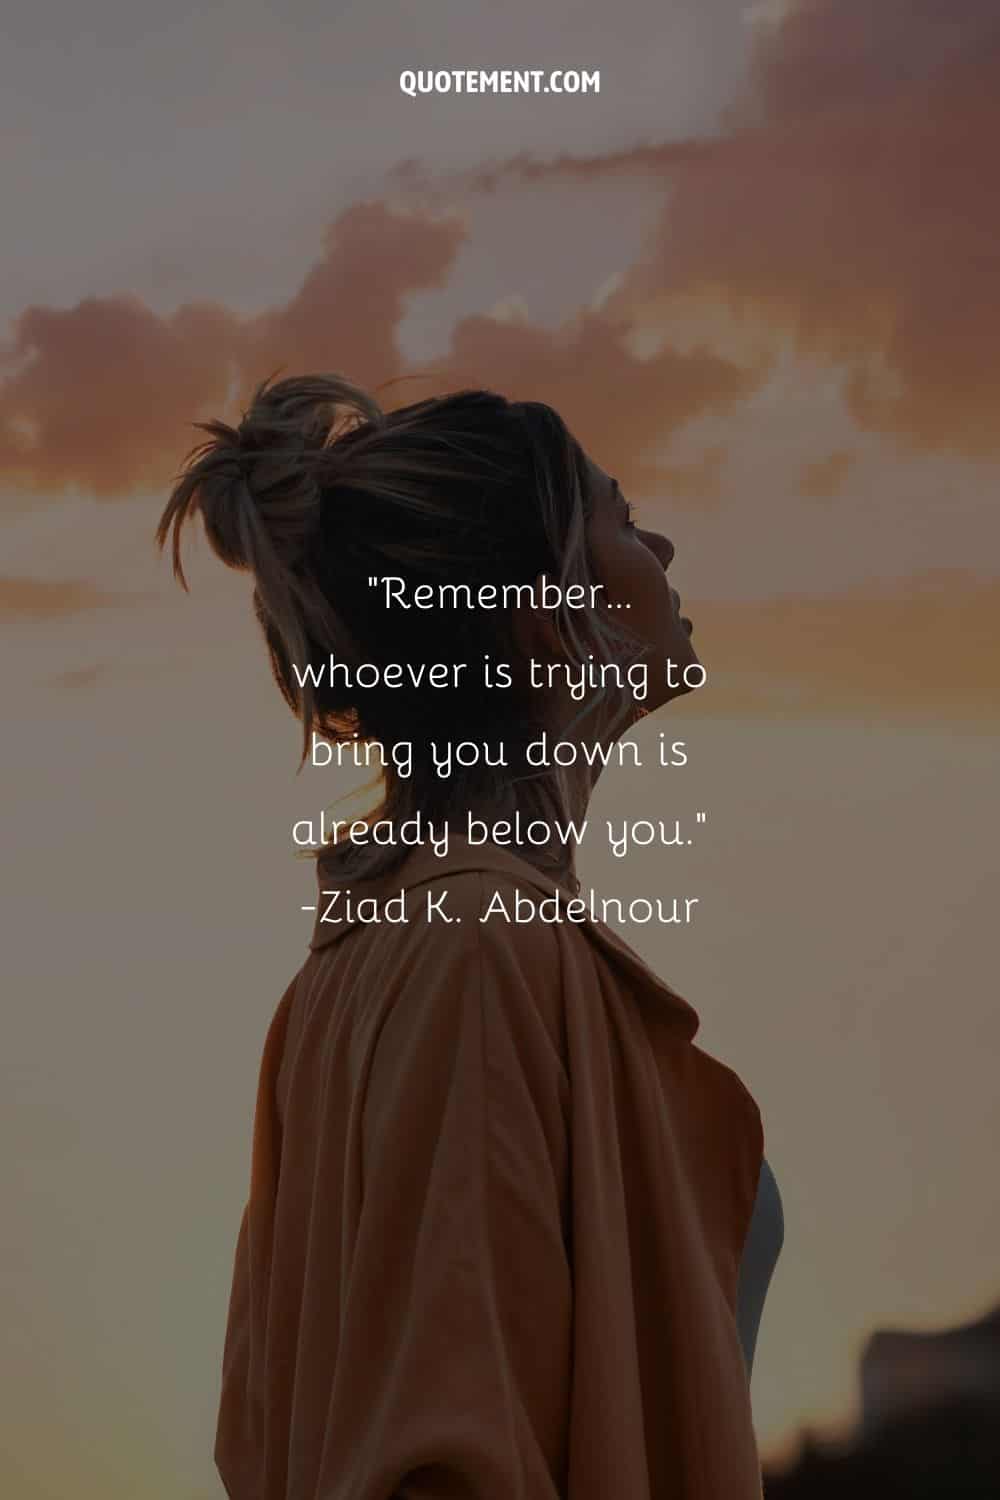 Remember… whoever is trying to bring you down is already below you